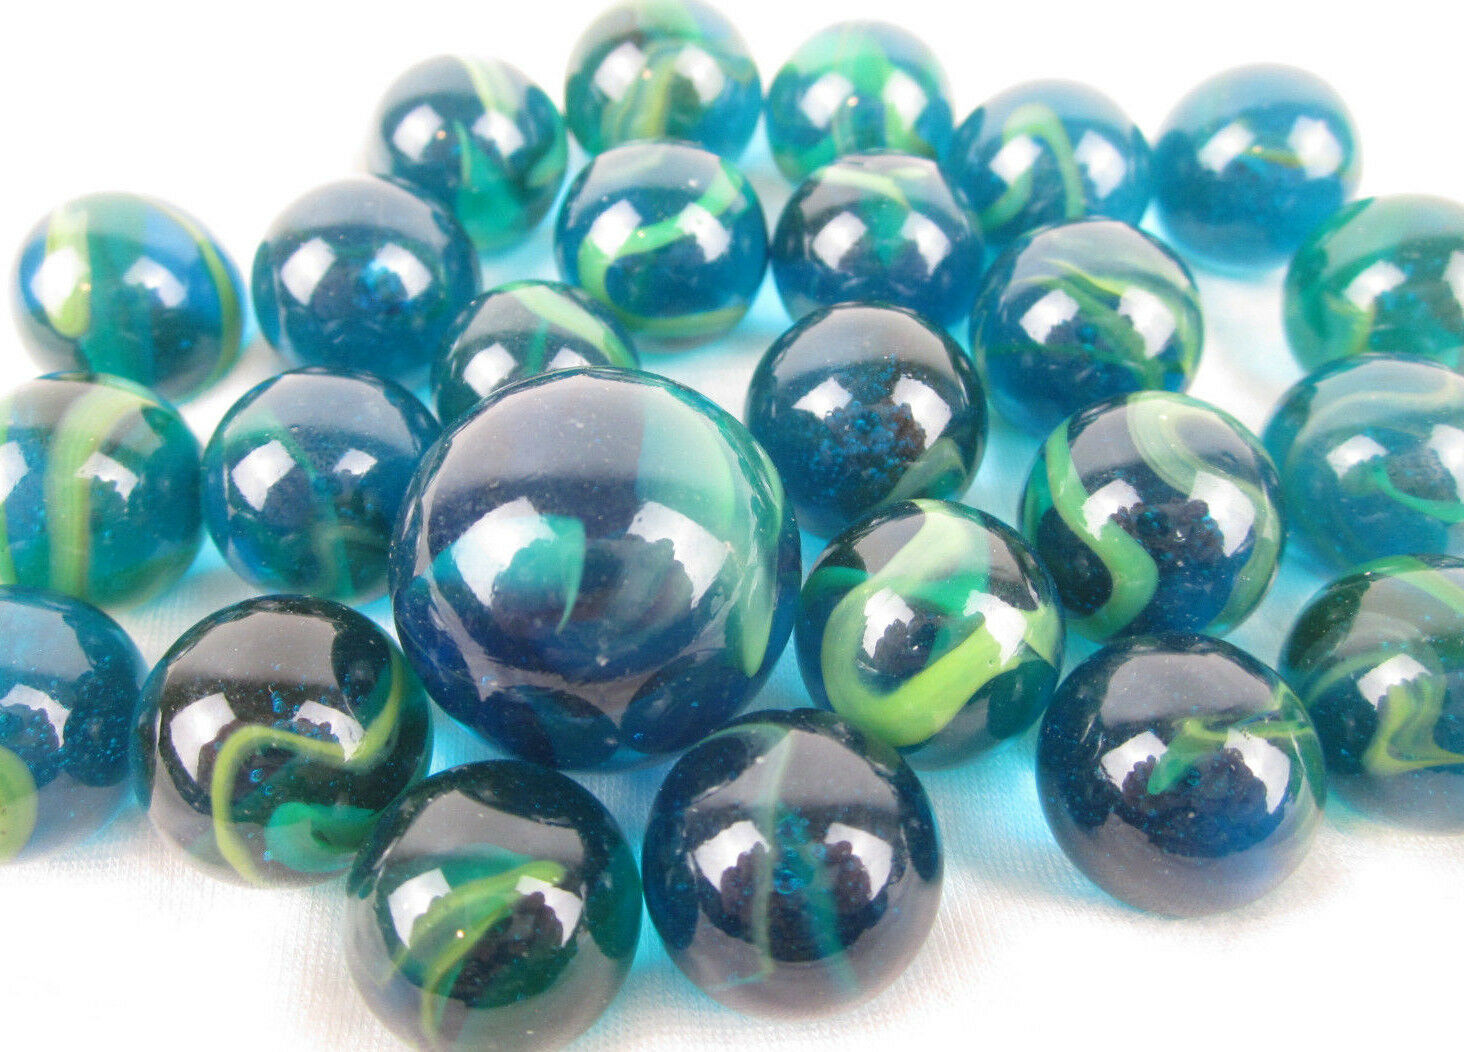 25 Glass Marbles Sea Turtle Sea Blue/green Translucent Game Pack Shooter Swirl